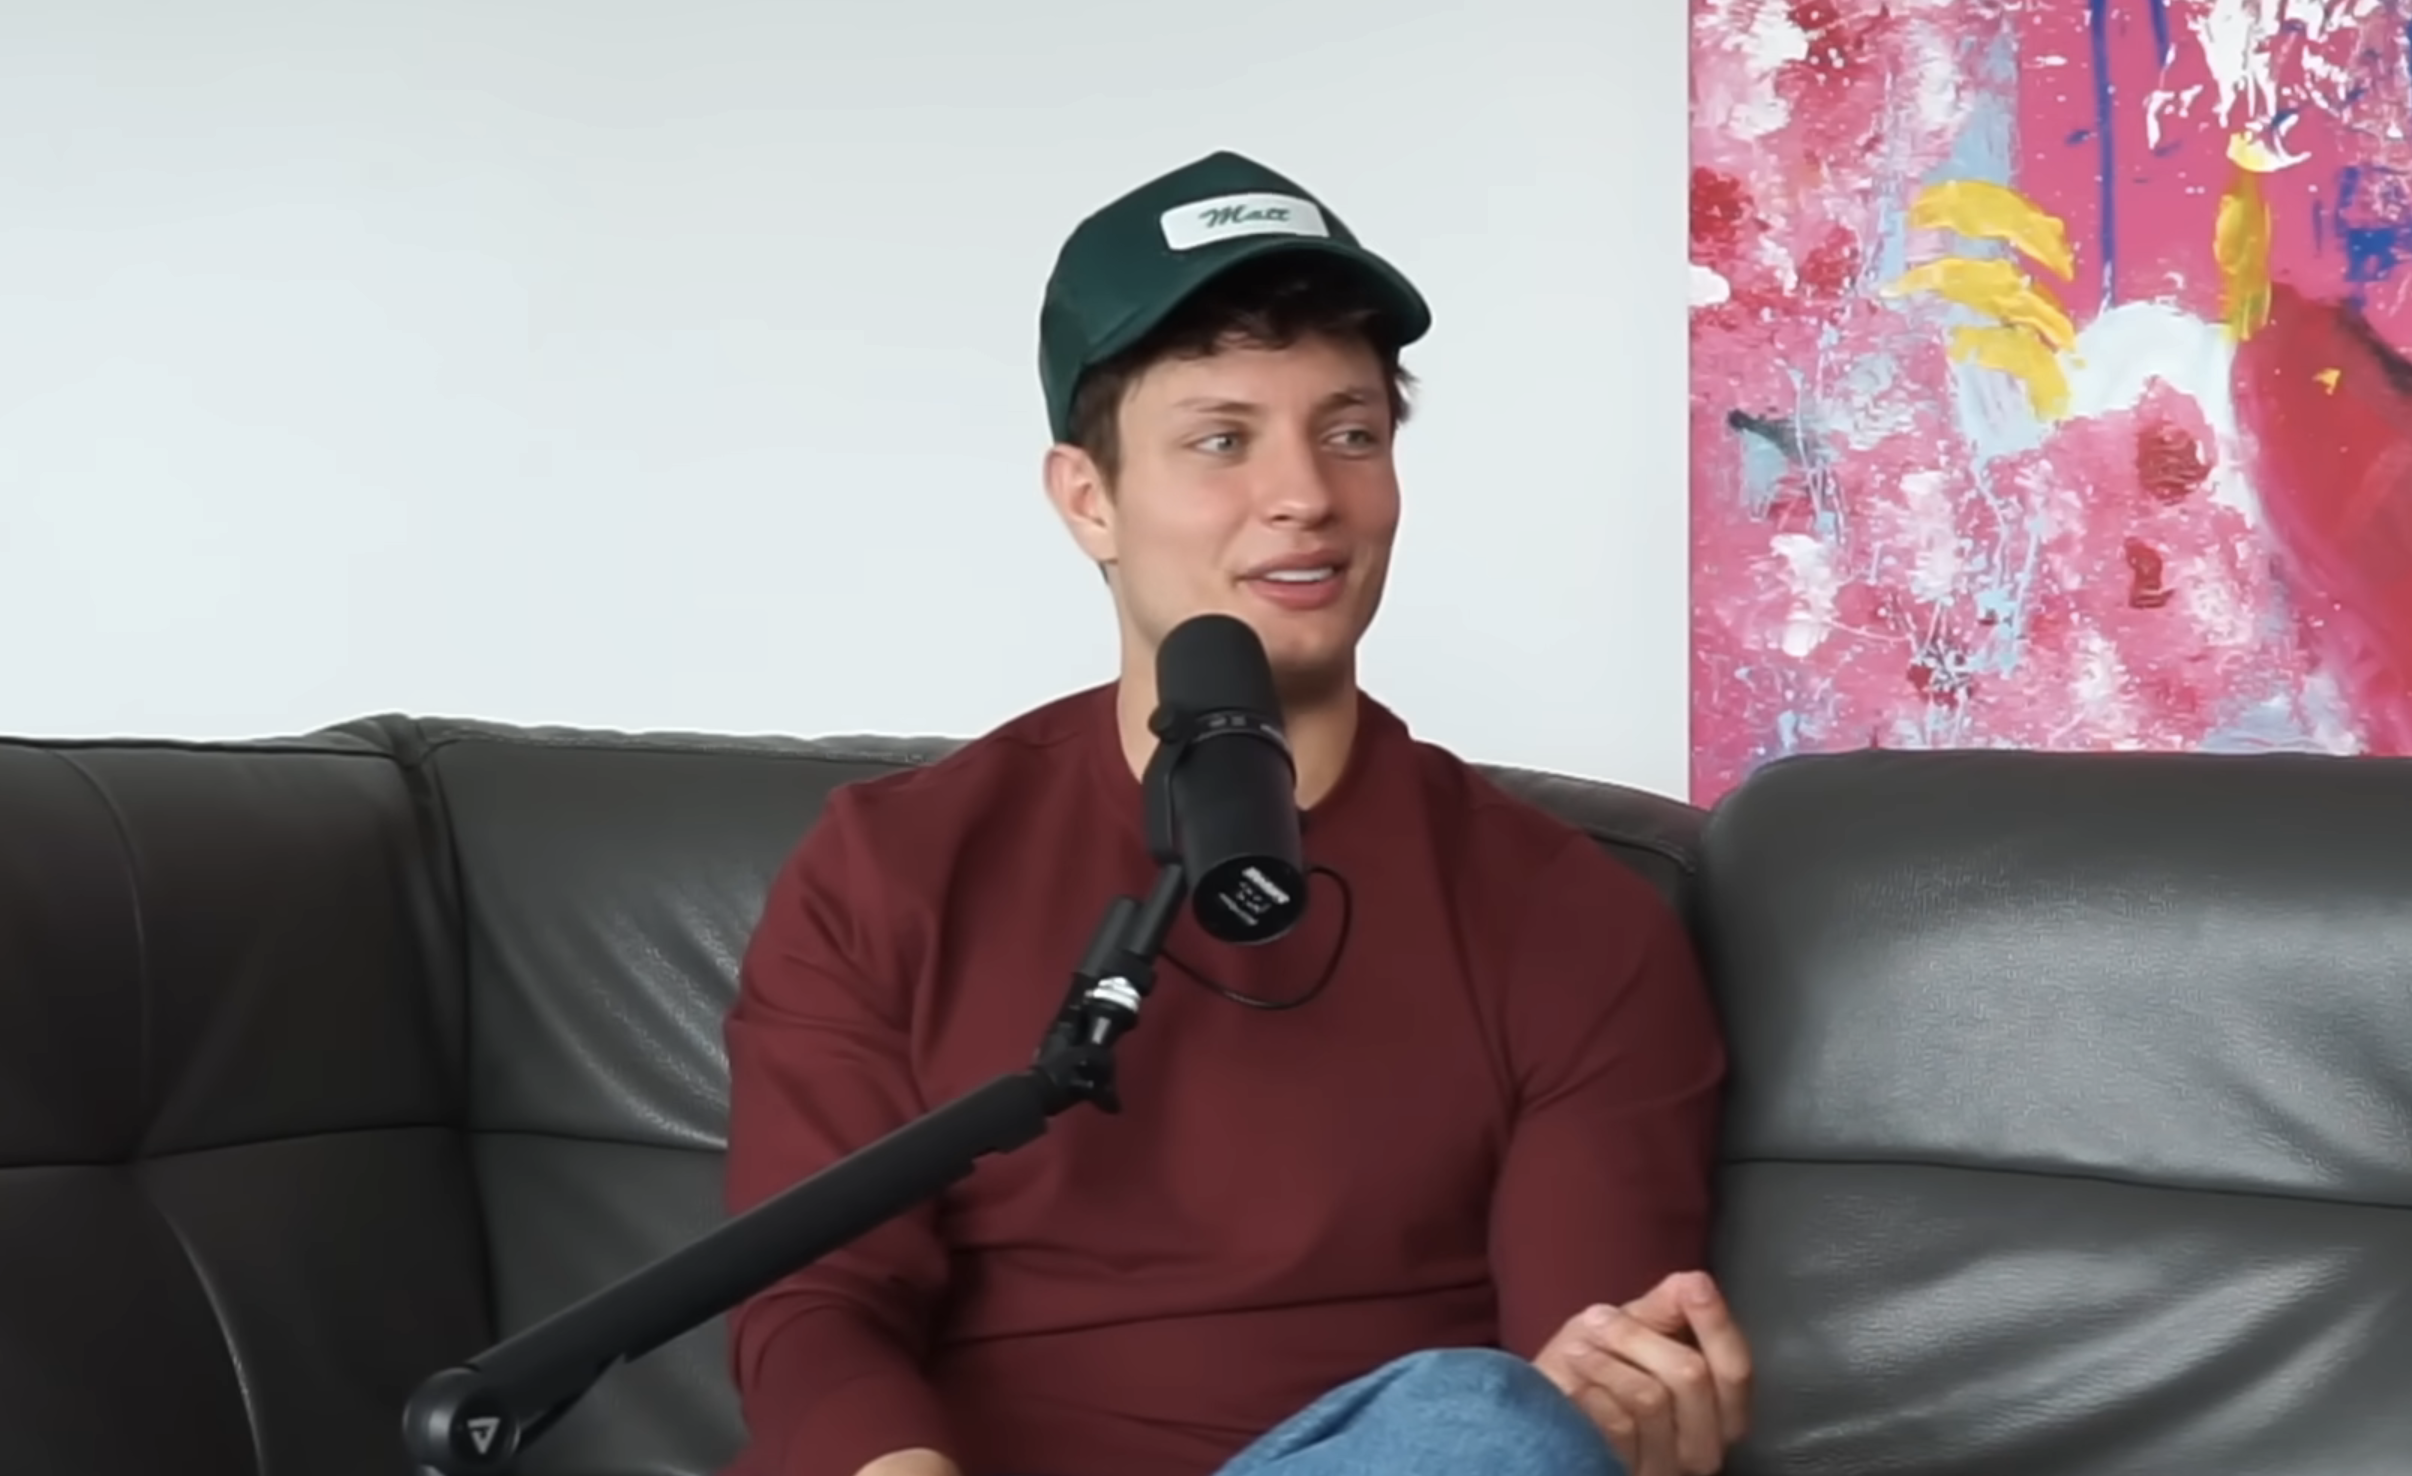 Closeup of Matt Rife sitting on a couch during the podcast interview